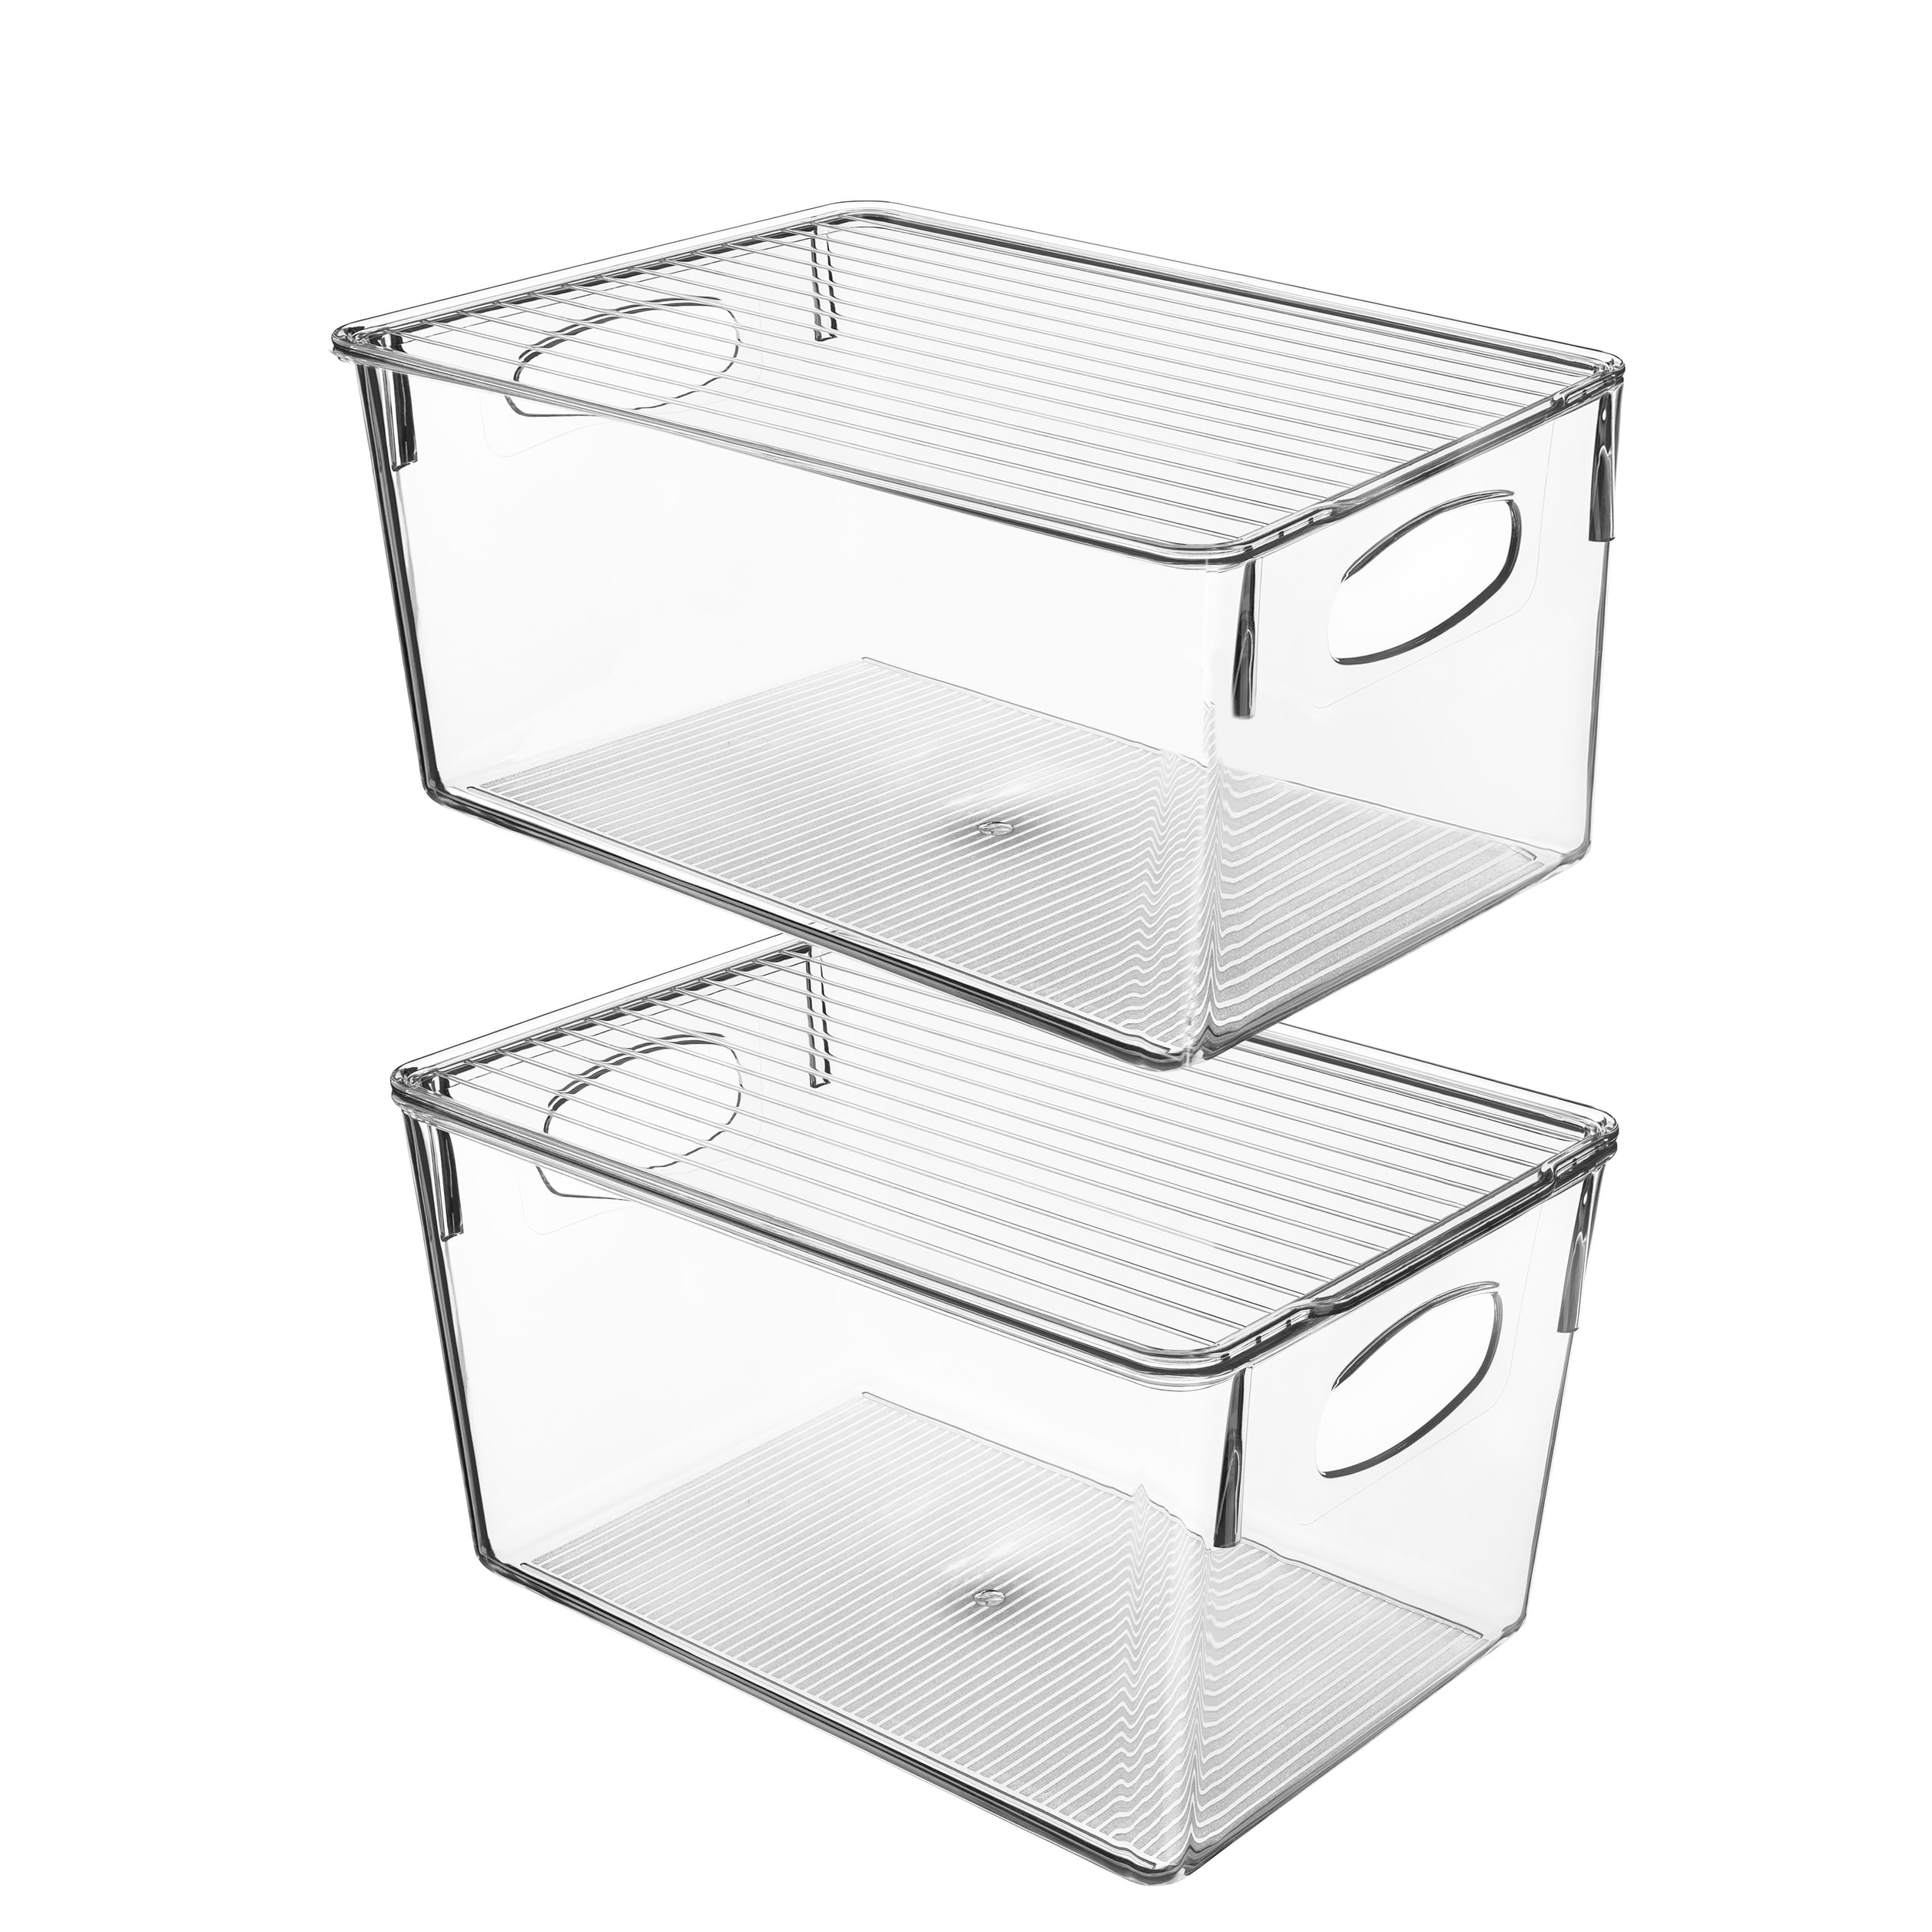 https://ak1.ostkcdn.com/images/products/is/images/direct/e8b5fb855c76fd5e4d786fd3a703ce997b67b784/Plastic-Storage-Clear-Bins-w--Lid%2C-Stackable-Pantry-Box-Bin-Containers.jpg